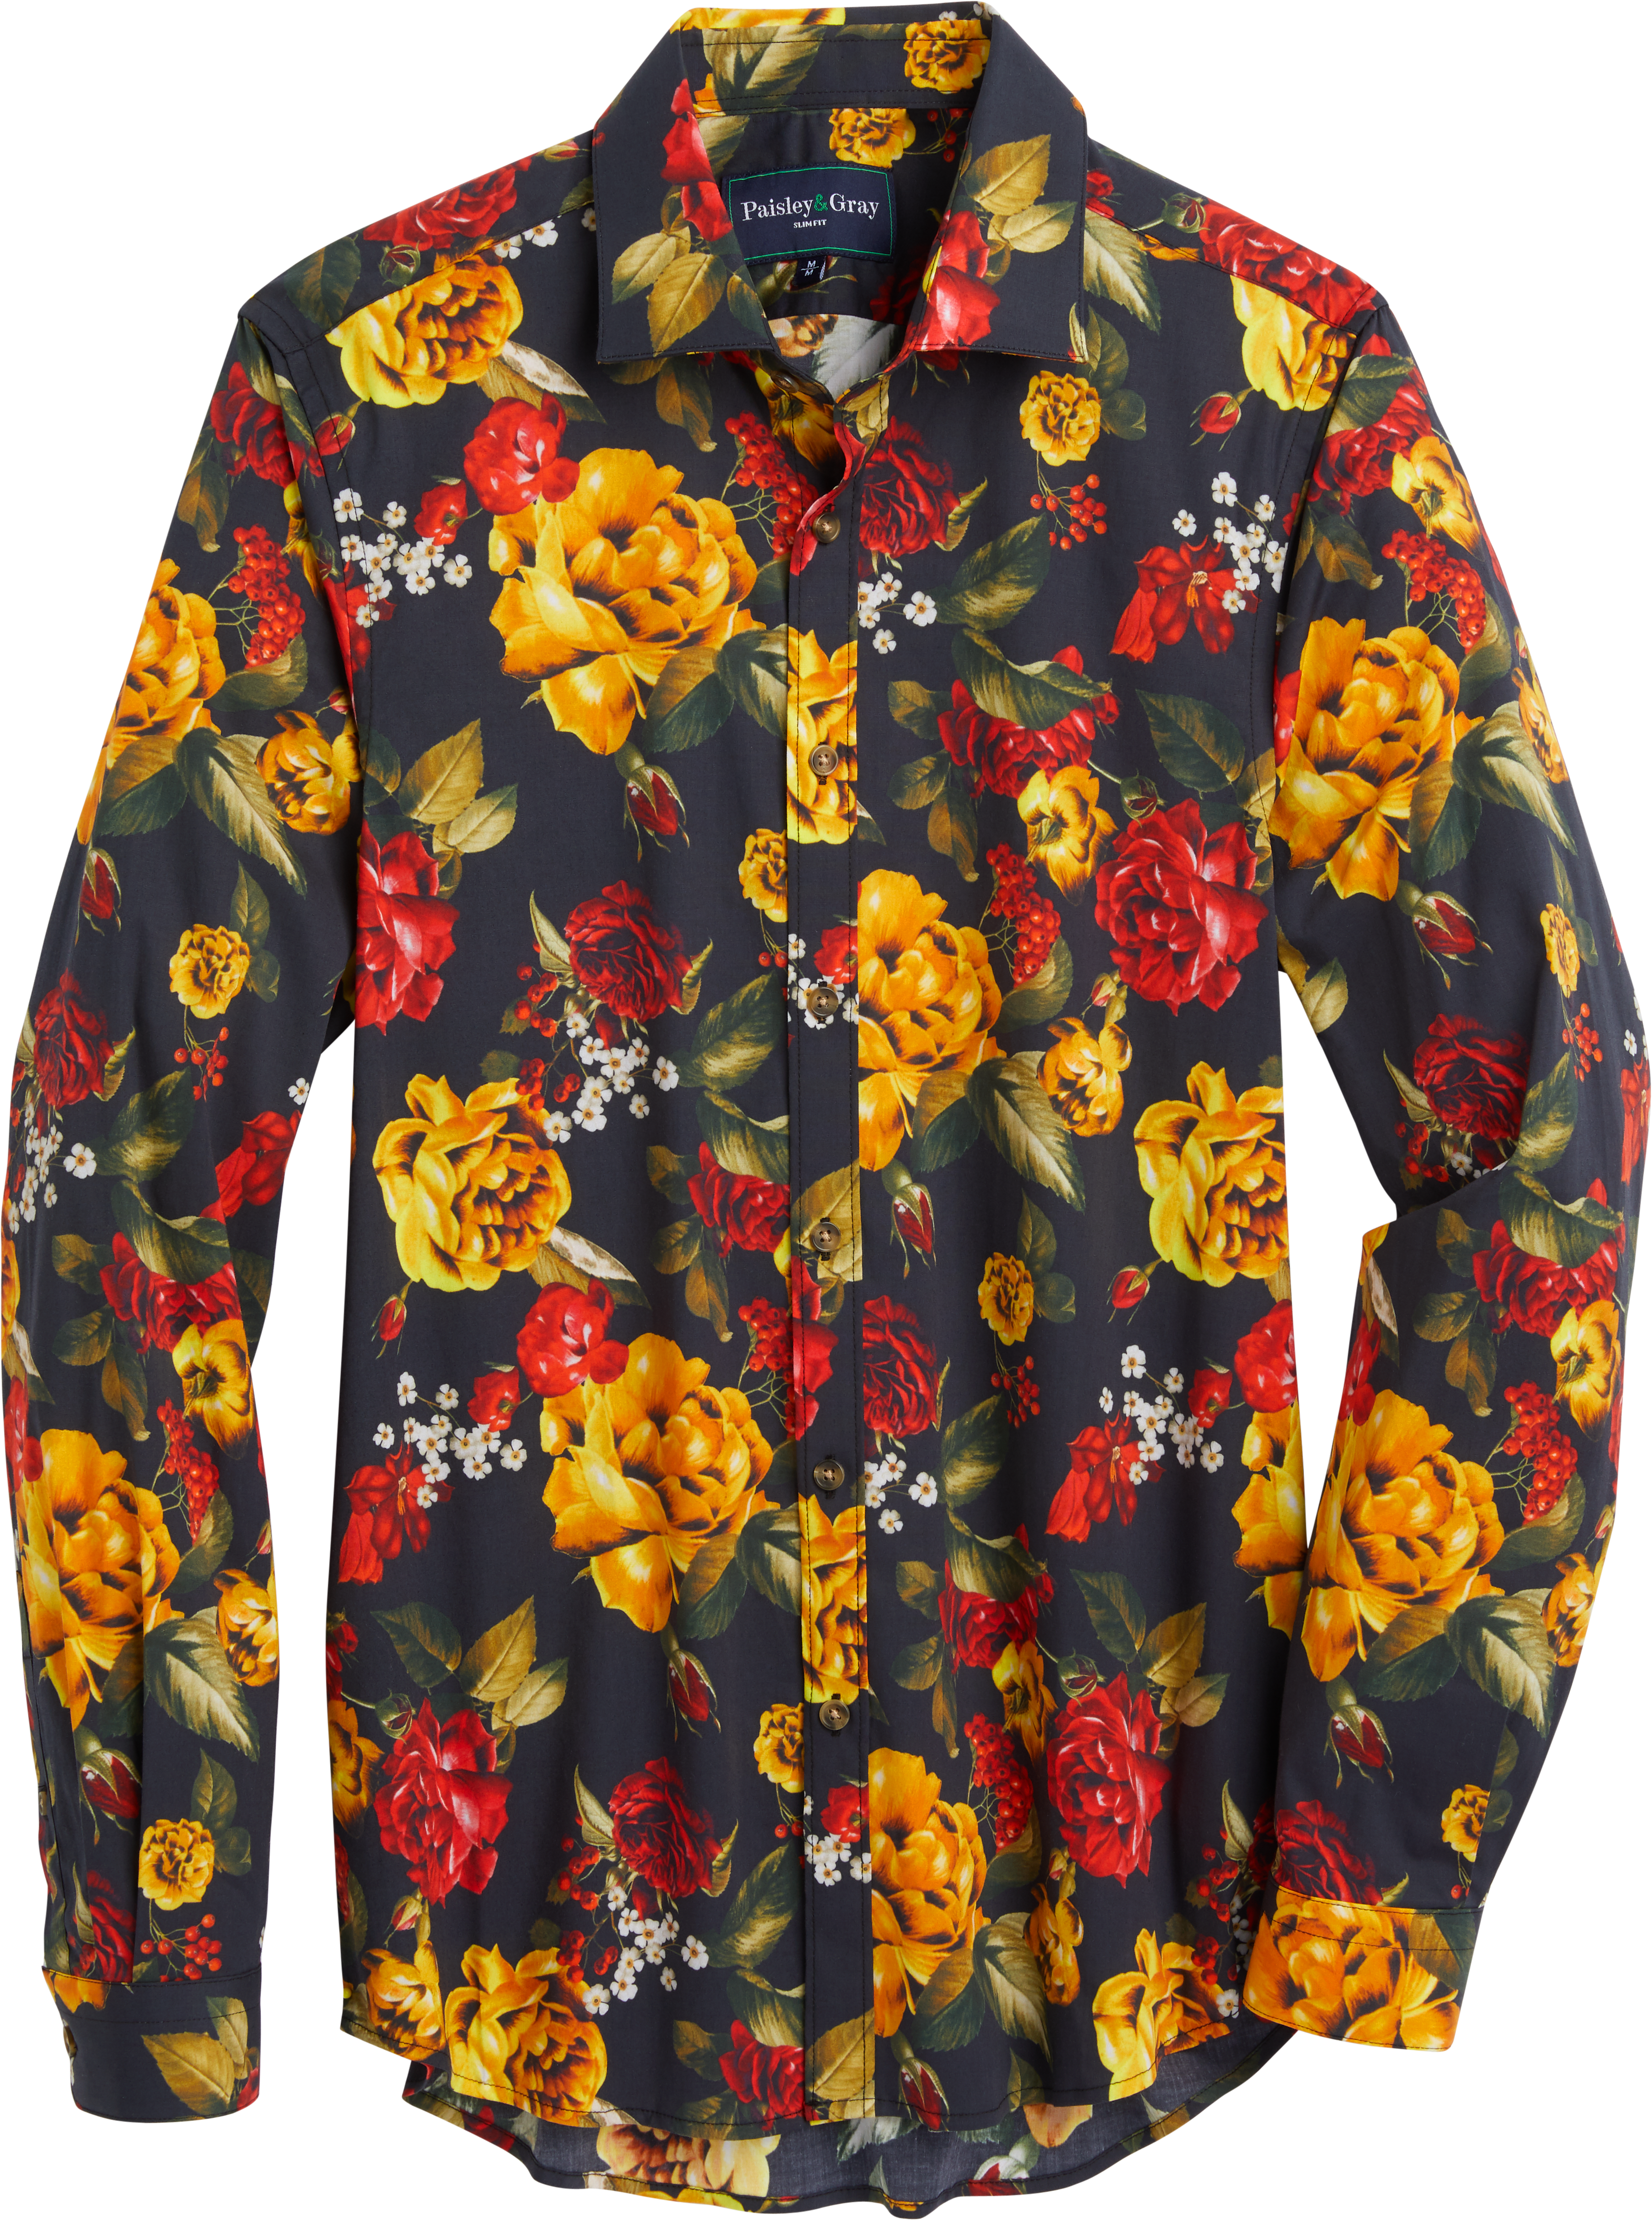 men's shirt with red roses